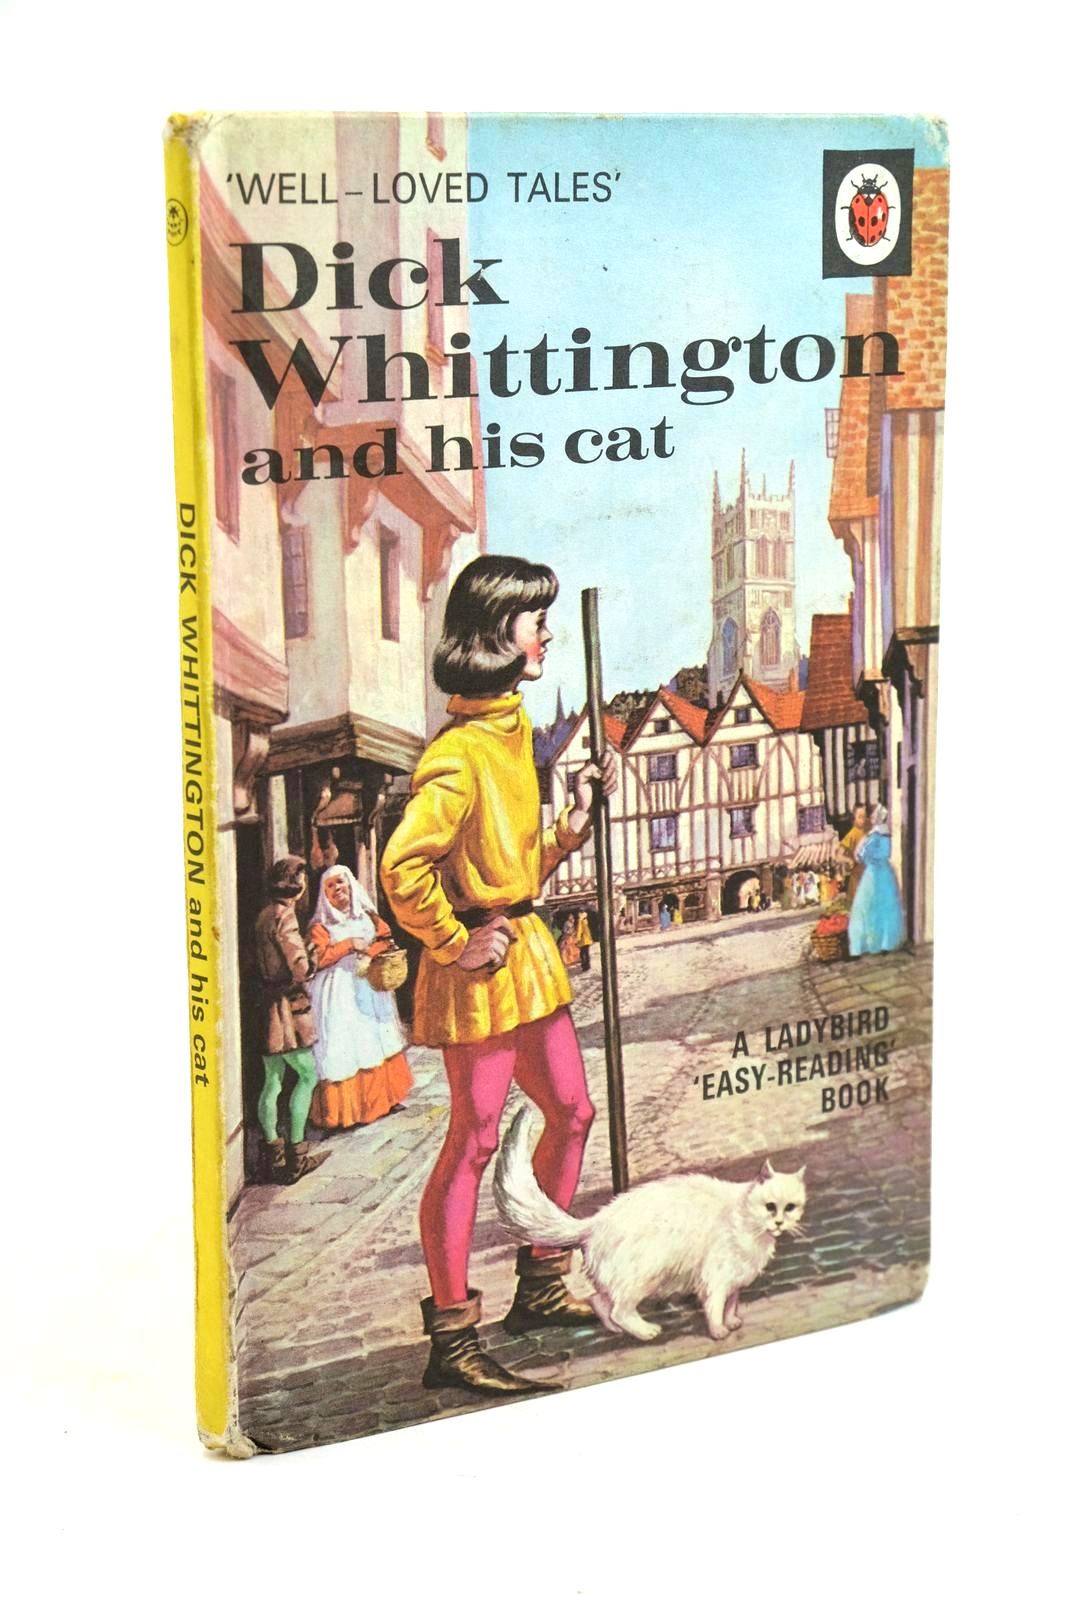 Photo of DICK WHITTINGTON AND HIS CAT written by Southgate, Vera illustrated by Winter, Eric published by Wills &amp; Hepworth Ltd. (STOCK CODE: 1321460)  for sale by Stella & Rose's Books